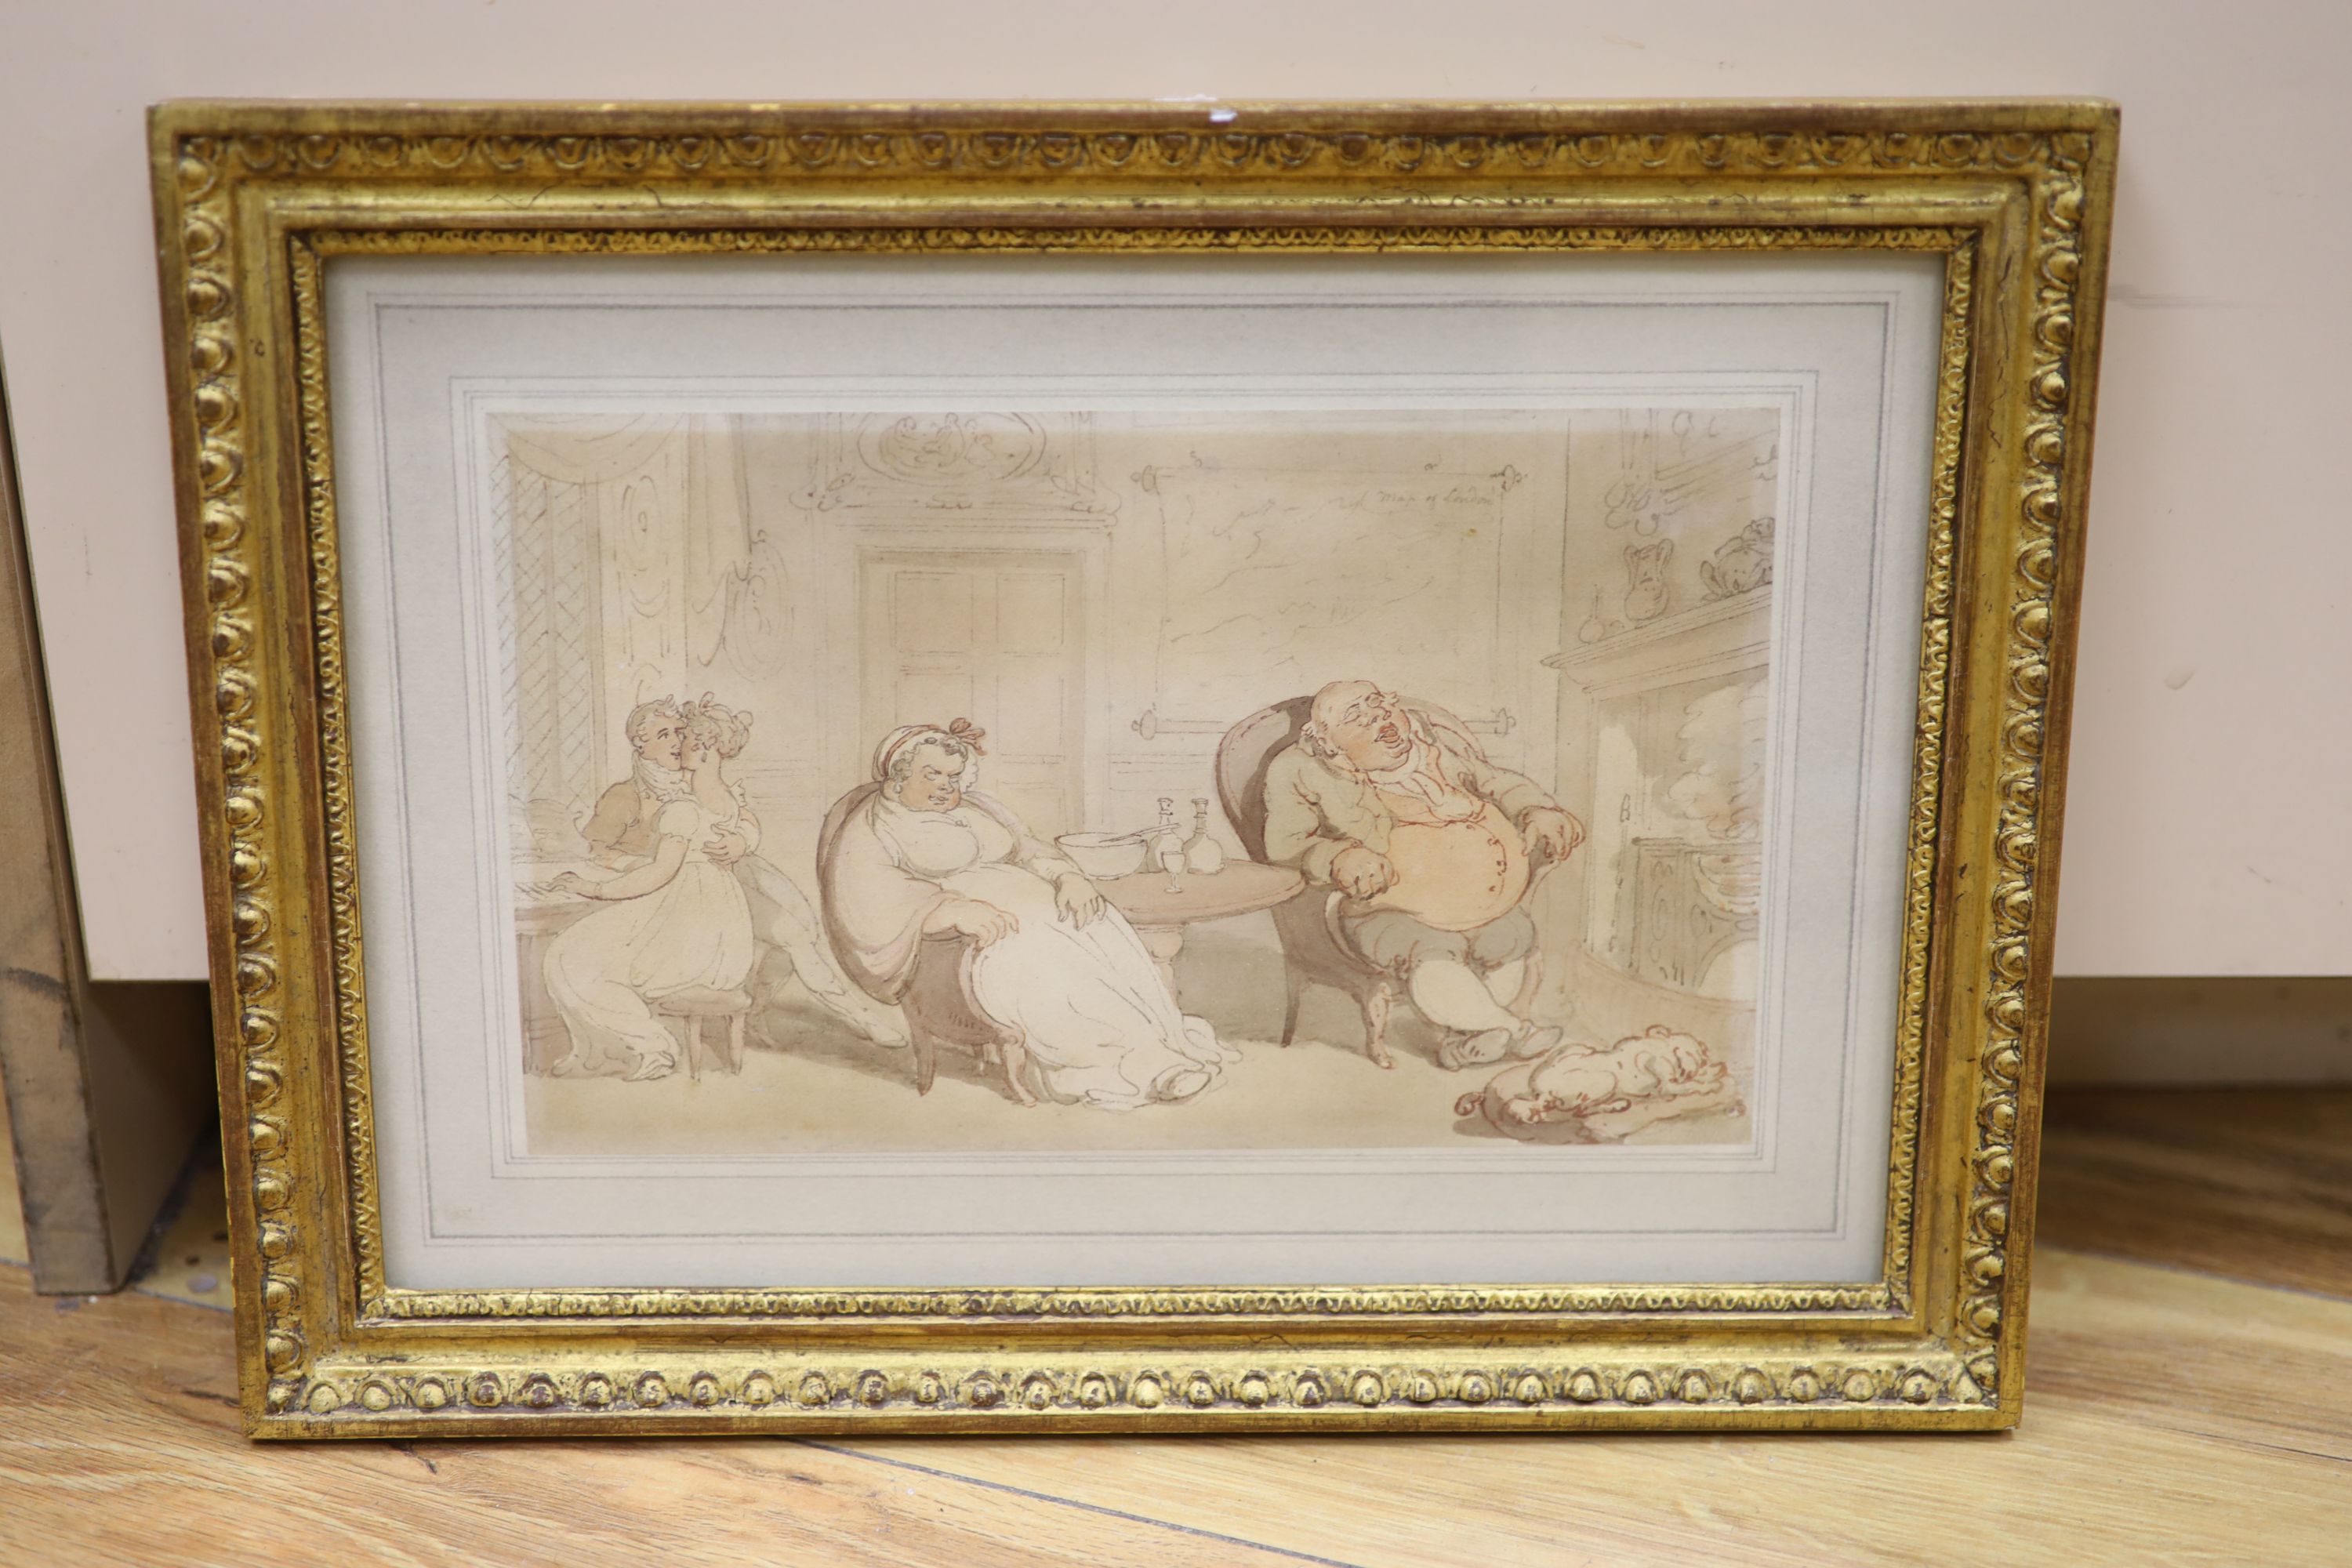 Thomas Rowlandson (1756-1827), ink and watercolour, 'The Music Lesson', Agnews label verso, 14 x - Image 2 of 3